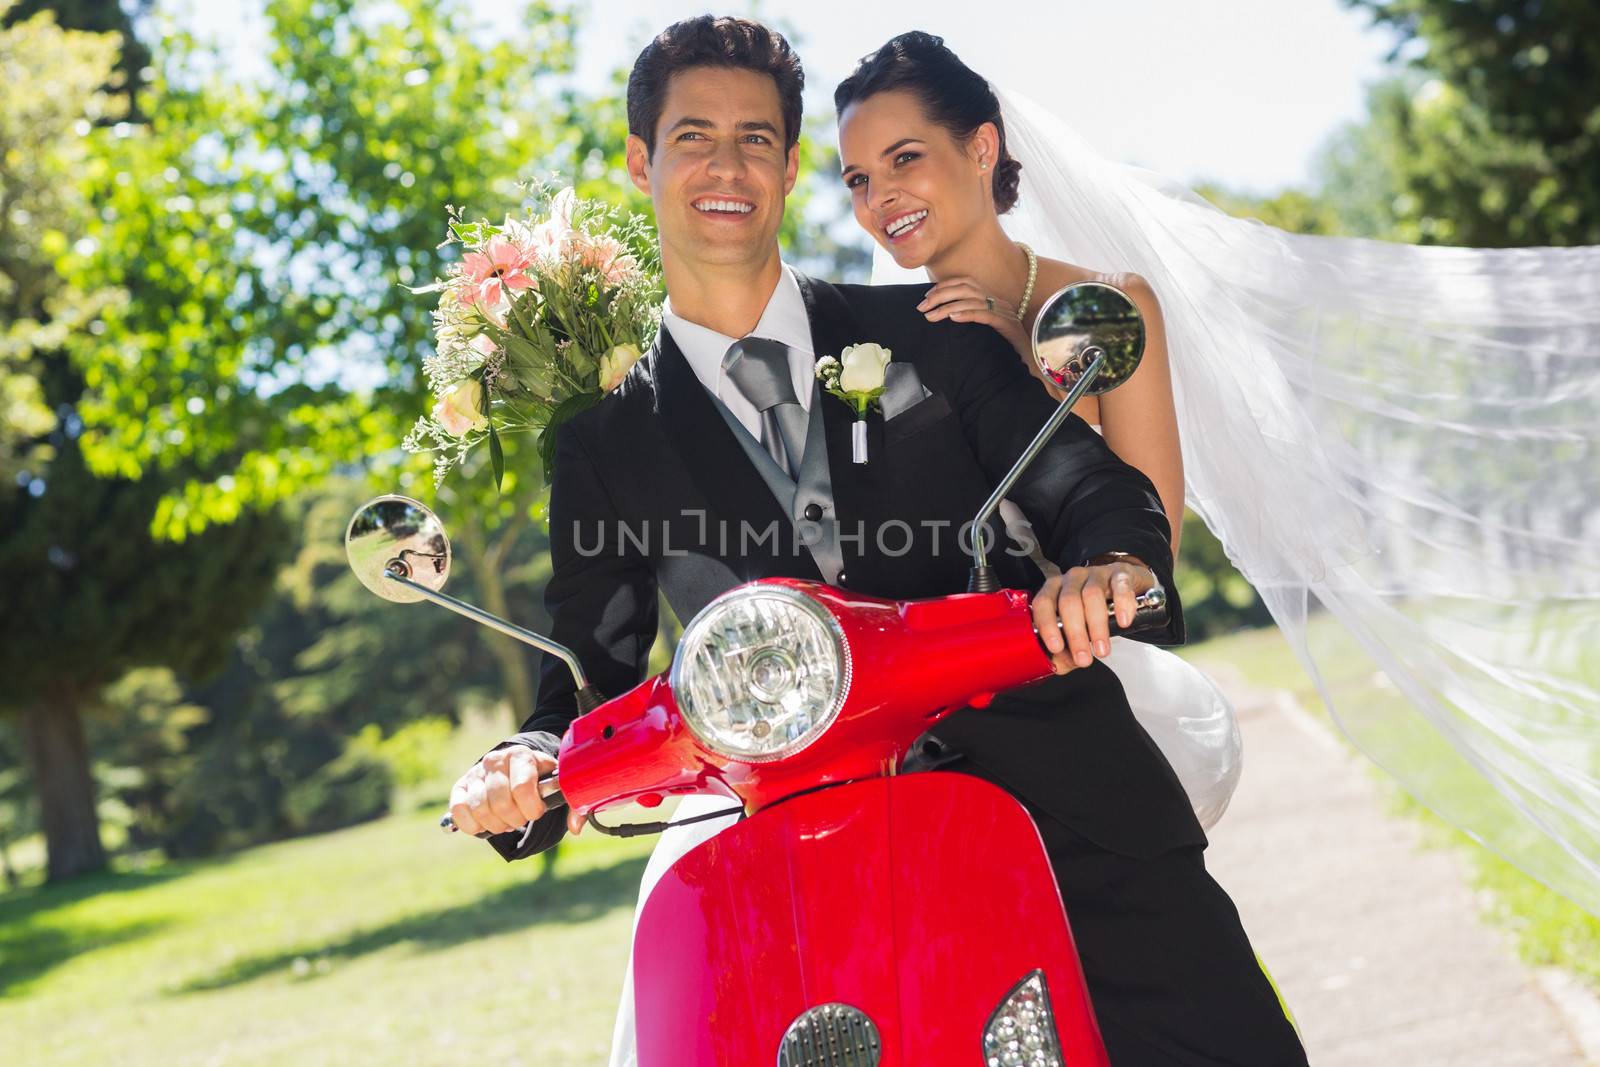 Portrait of a newlywed couple sitting on scooter in the park